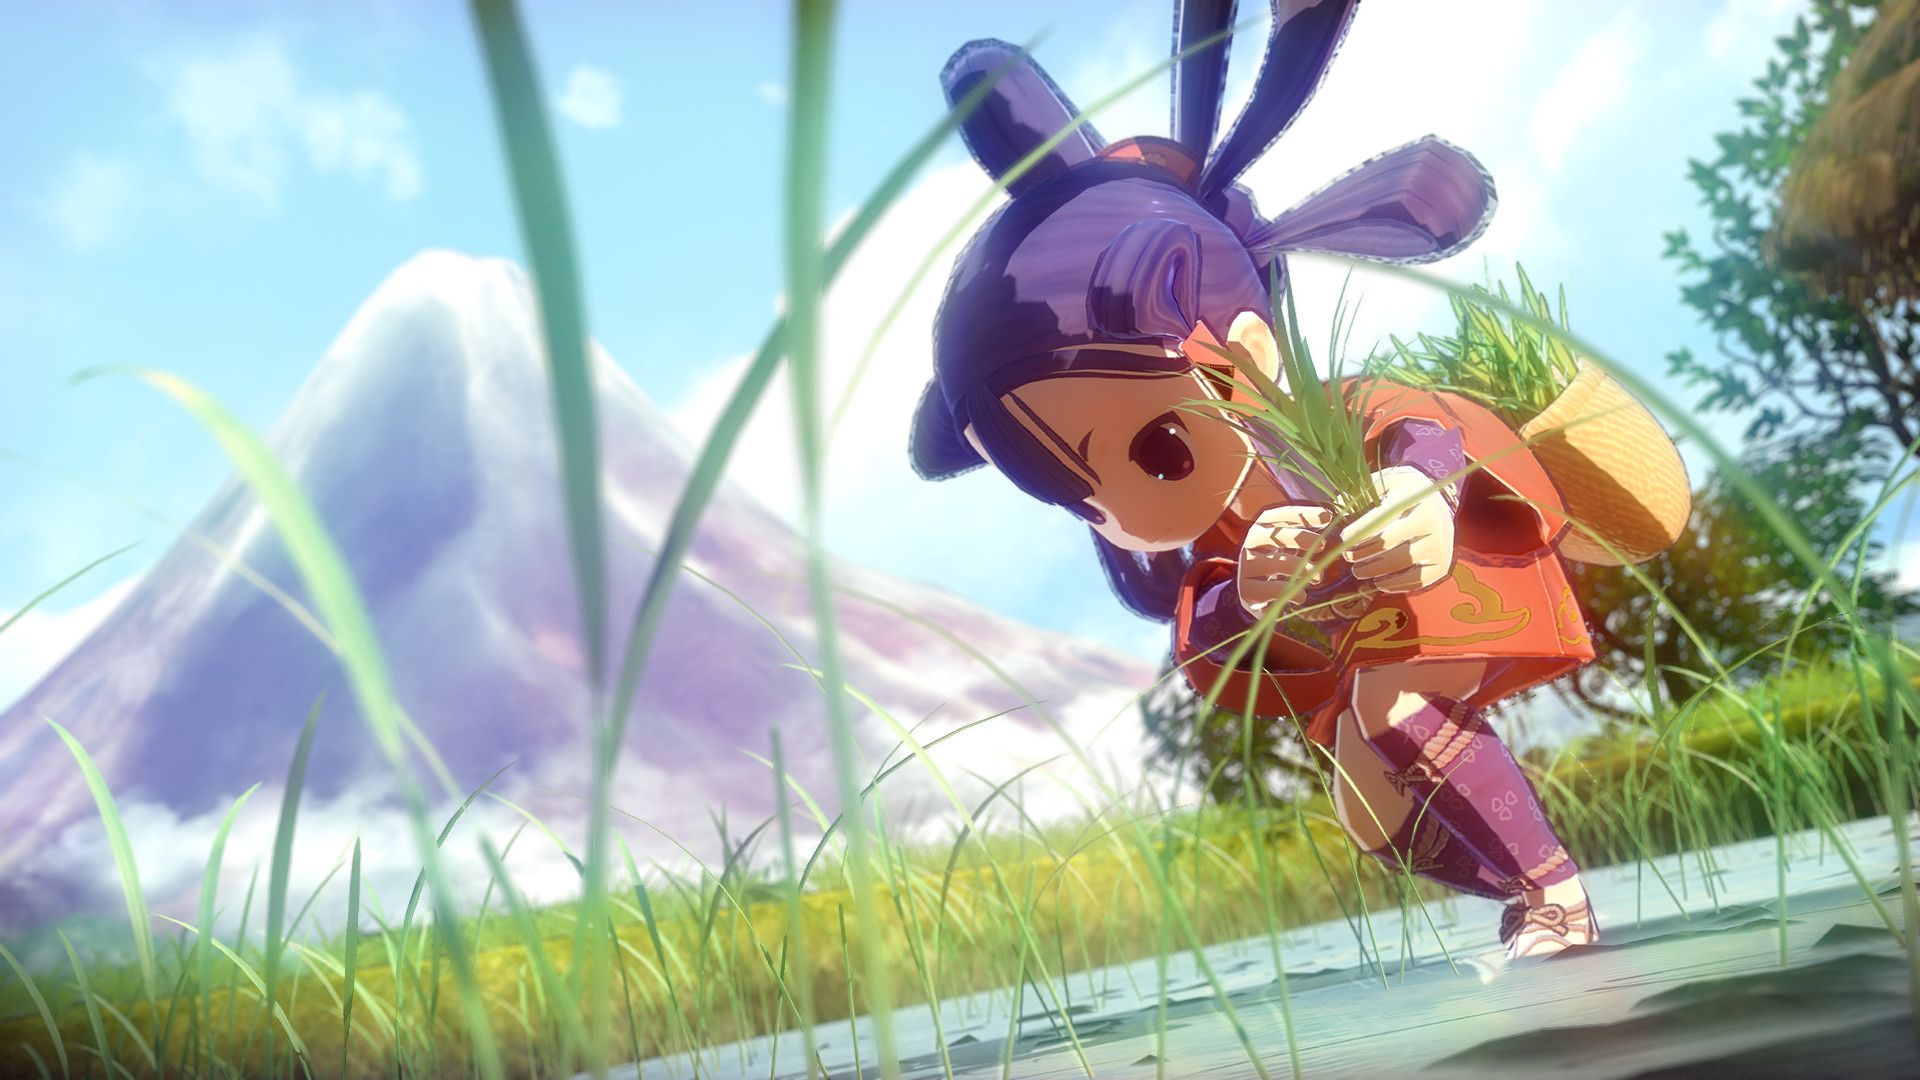 Sakuna: Of Rice and Ruin's rice farming hooked me harder than Stardew Valley